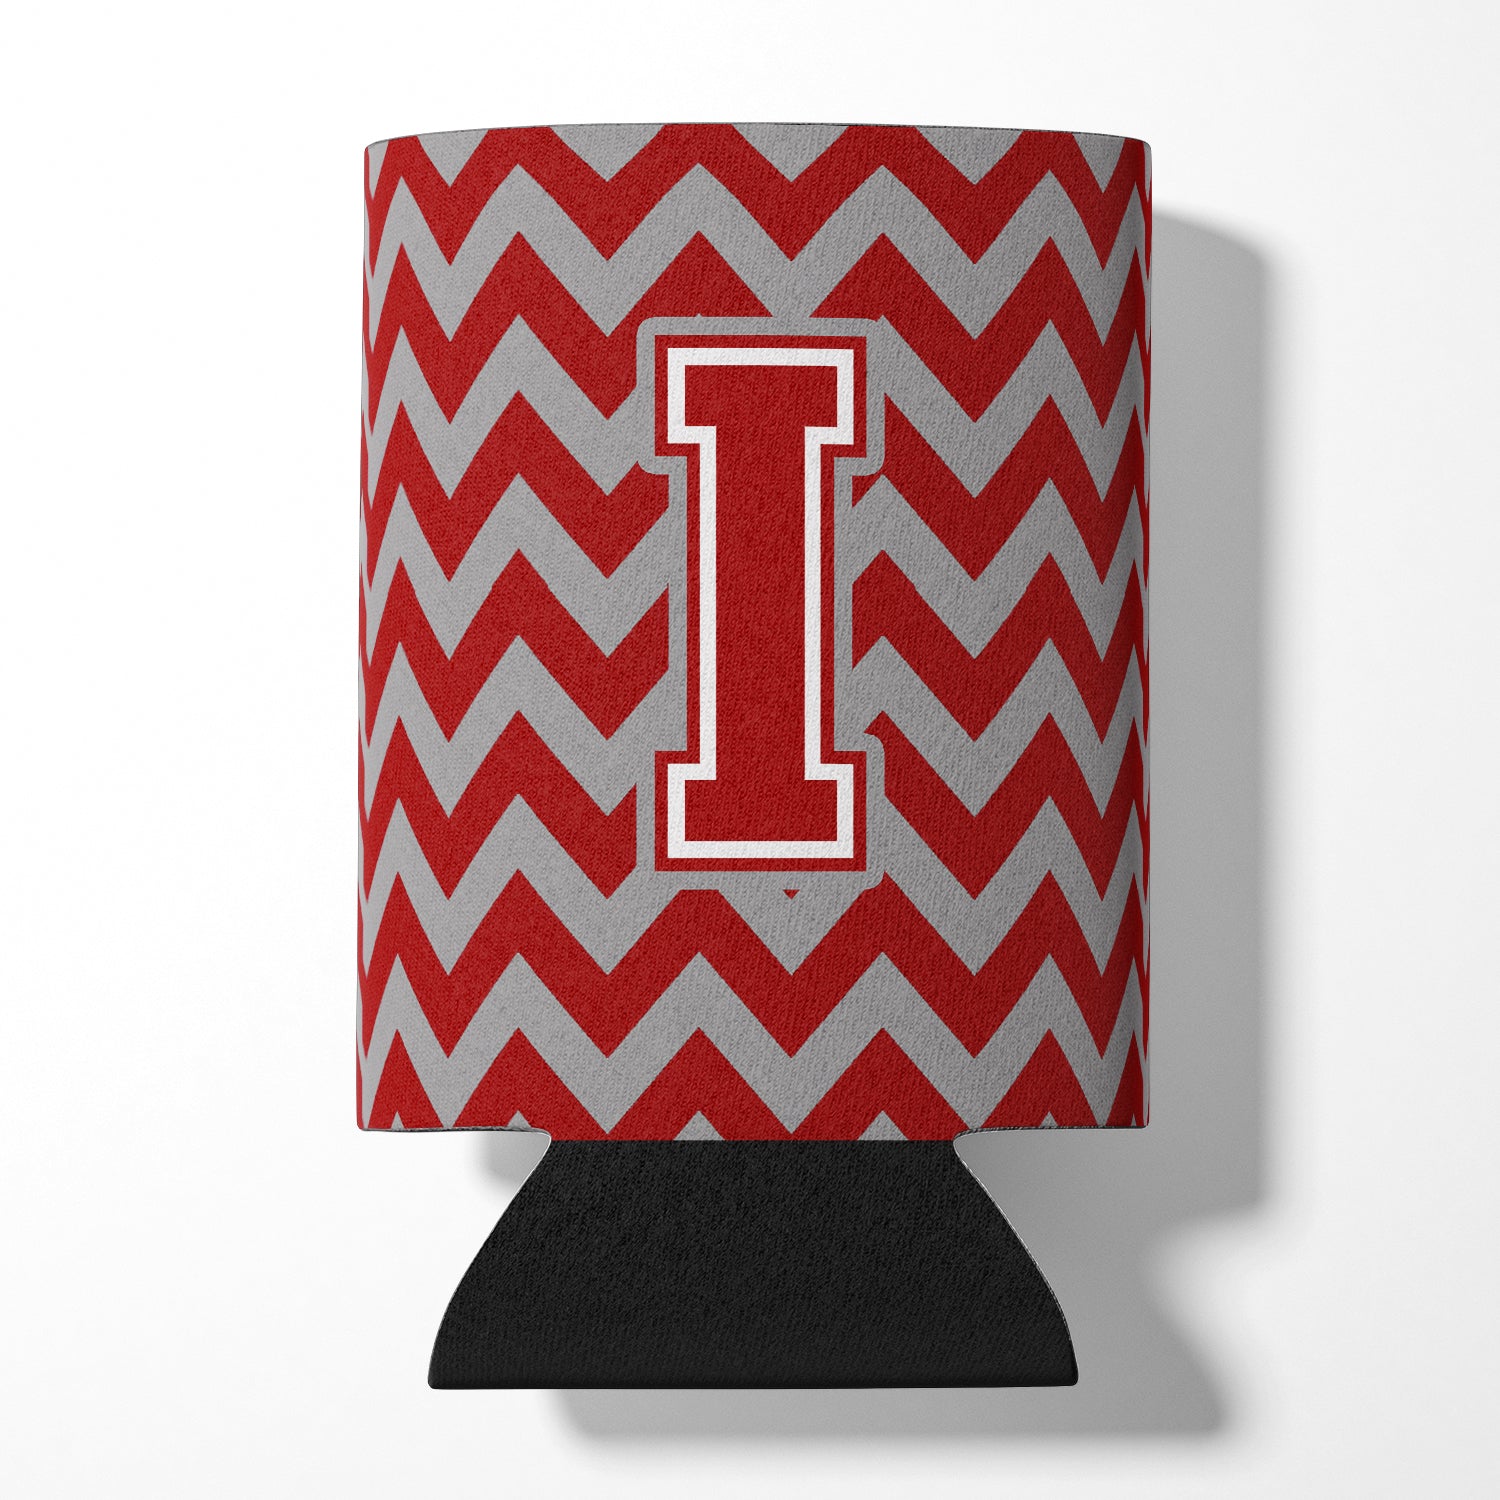 Letter I Chevron Maroon and White Can or Bottle Hugger CJ1049-ICC.